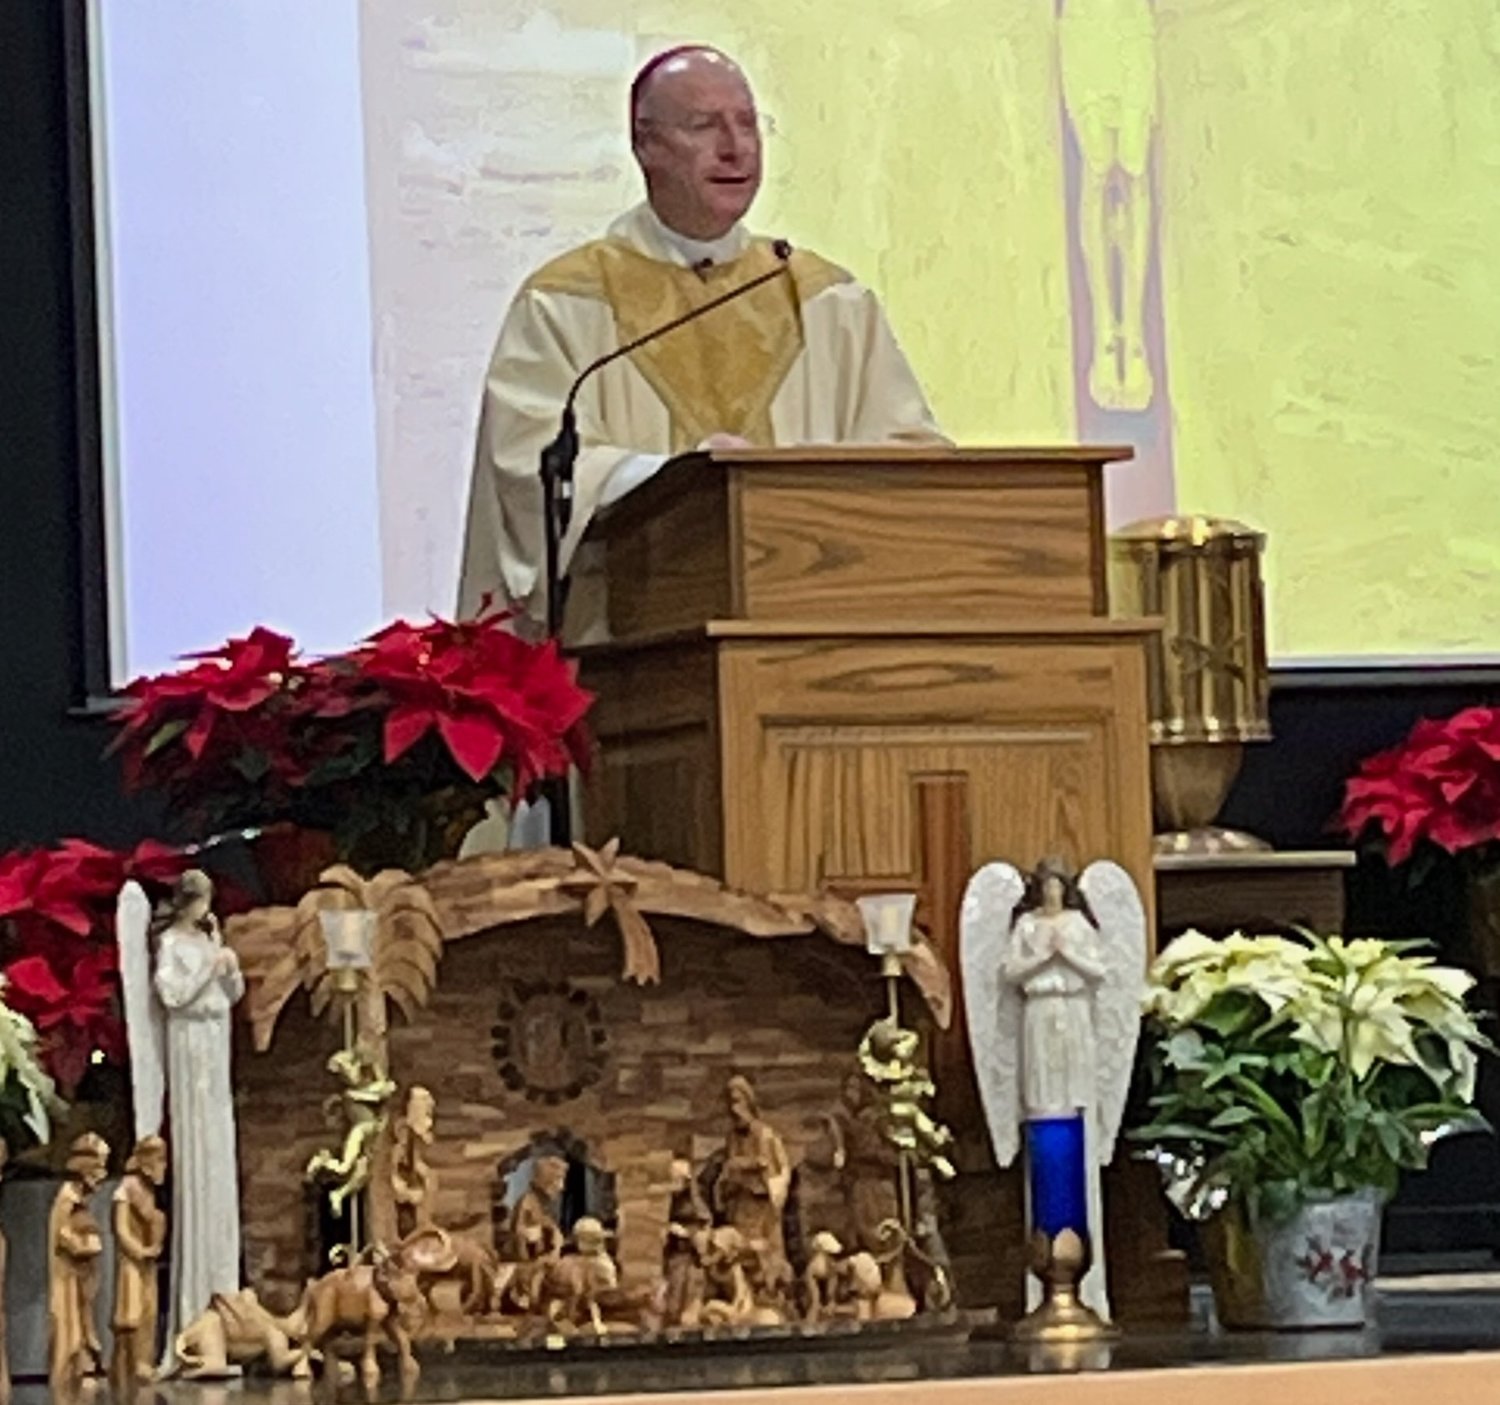 “What we celebrate today is not merely something that happened 2,000 years ago, but what continues to happen in our day and in our world, even in our brokenness,” Bishop W. Shawn McKnight proclaimed on Christmas Day.